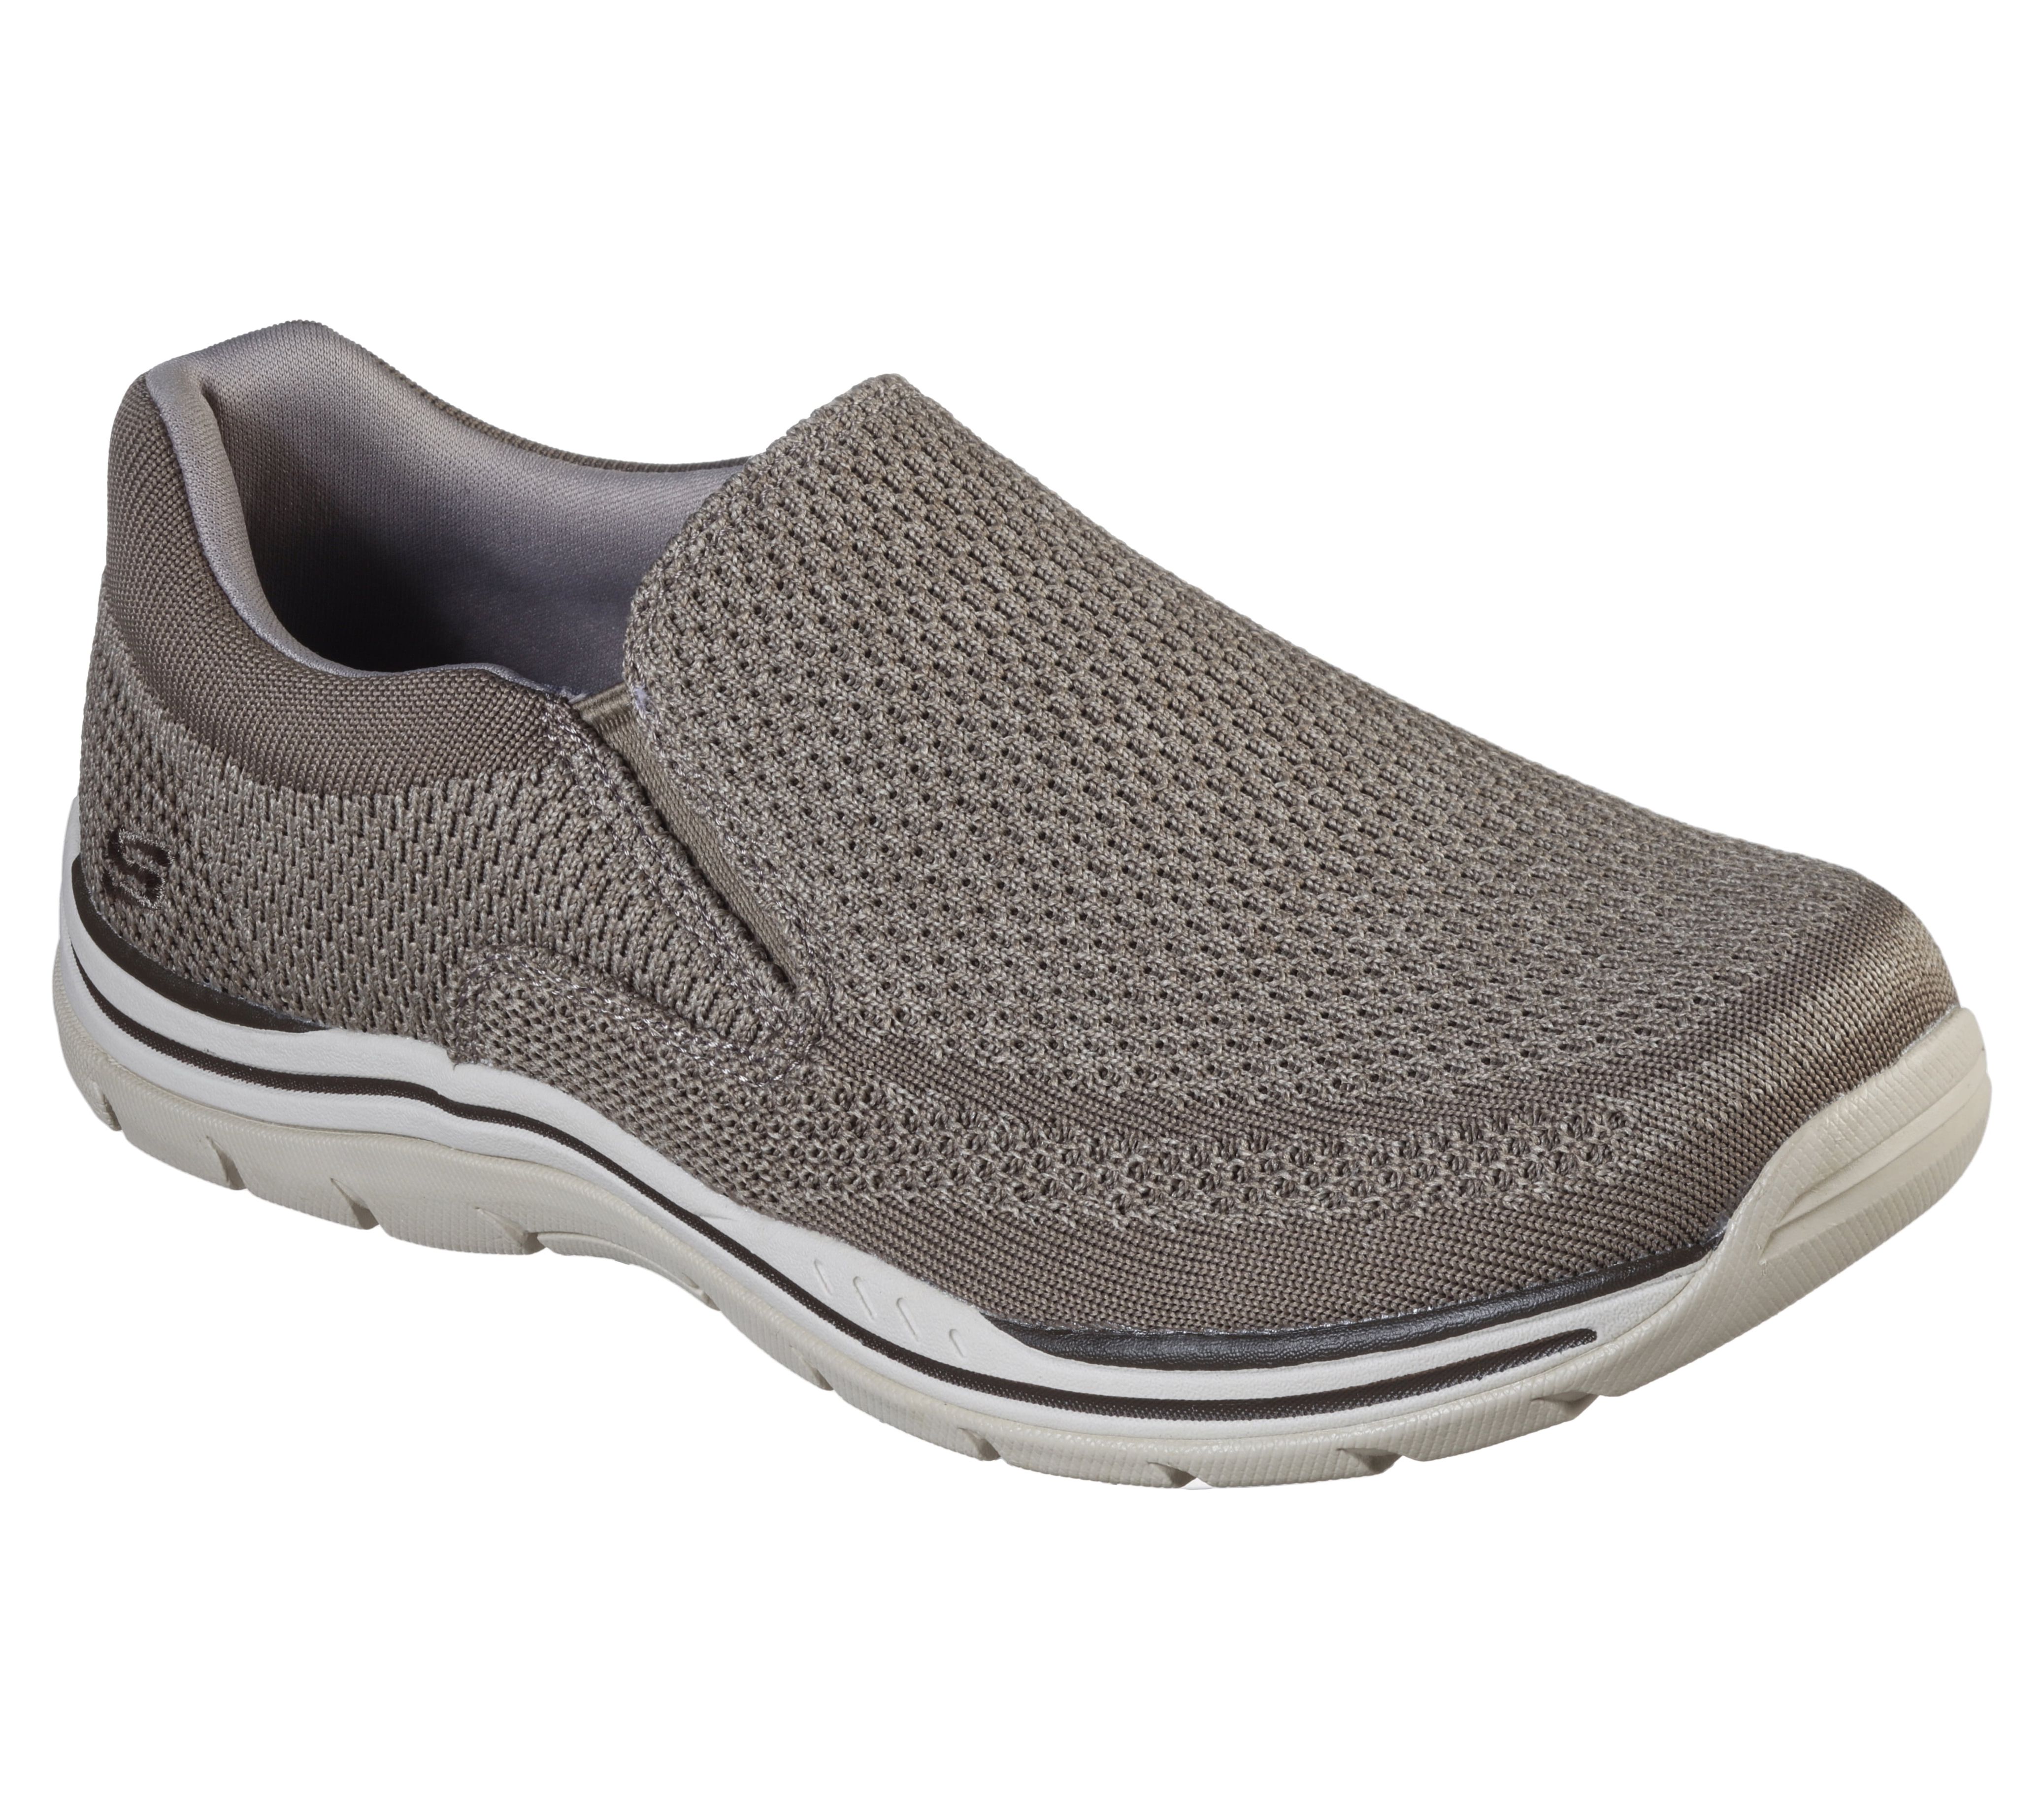 Skechers Men's Relaxed Fit Expected Gomel Casual Slip-on Sneaker (Wide Width Available) - image 1 of 7